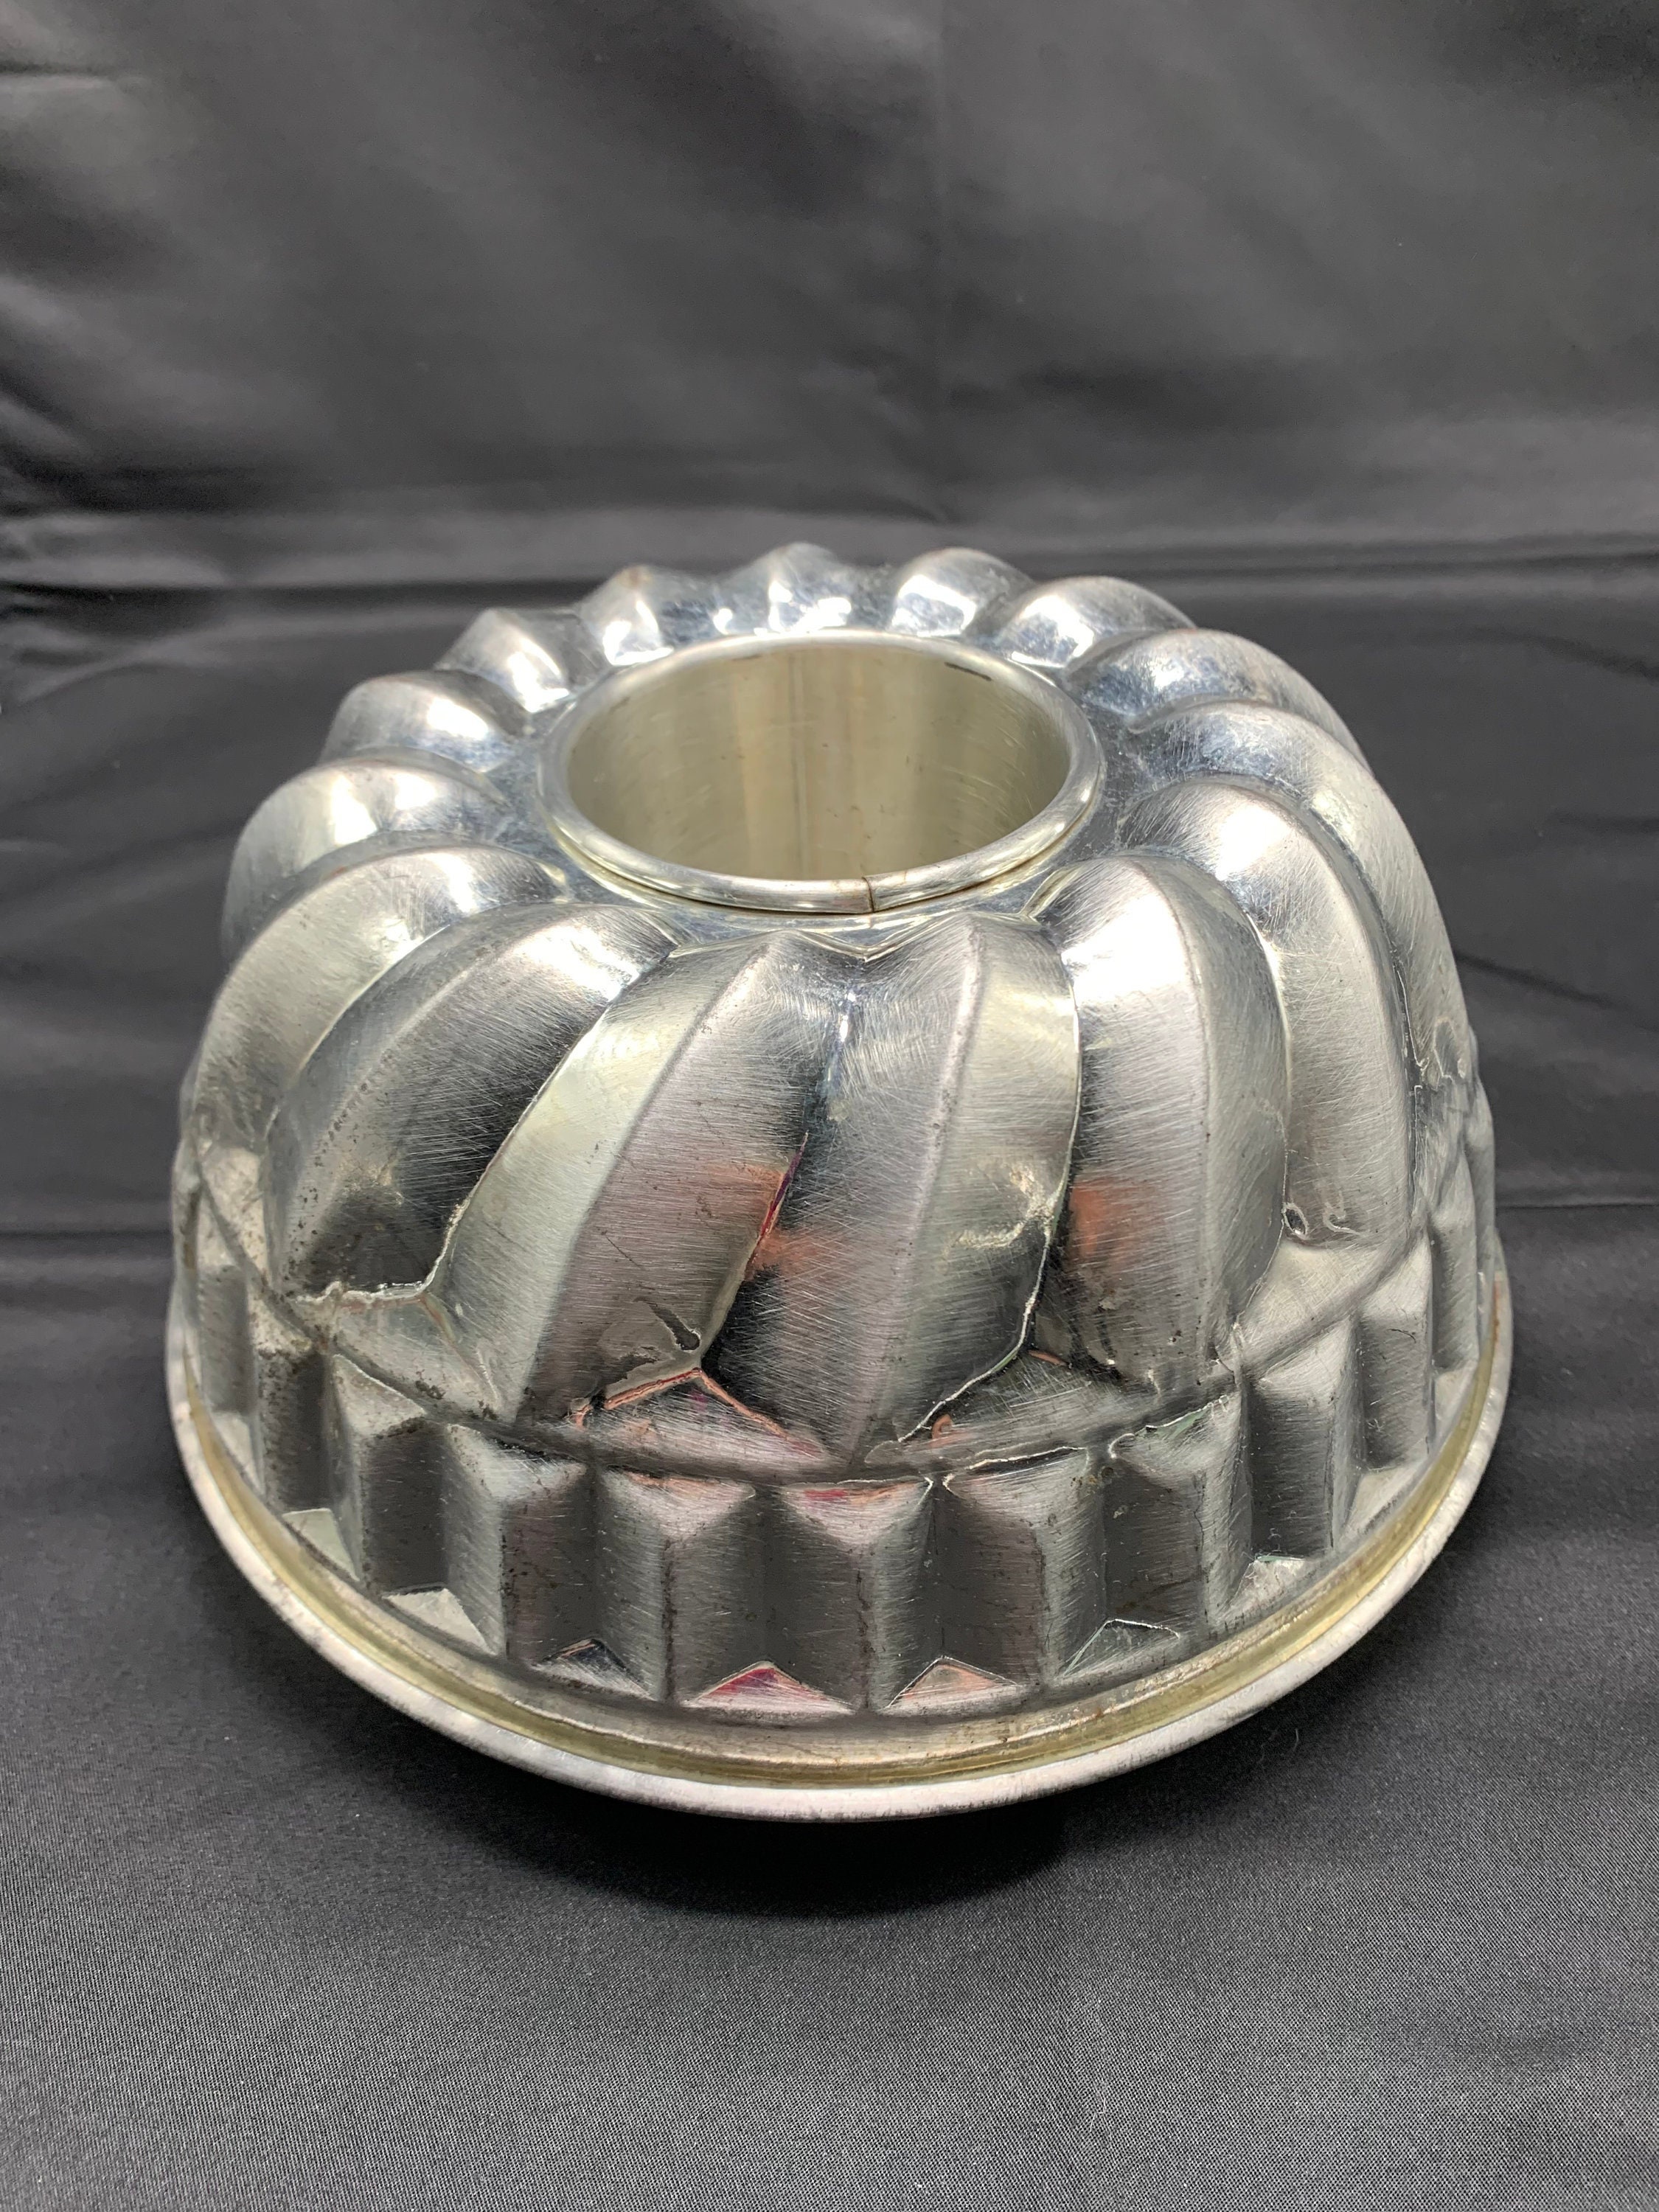 Vintage Thurnauer Bundt Cake Pan, 9 inch diameter, Made in Germany